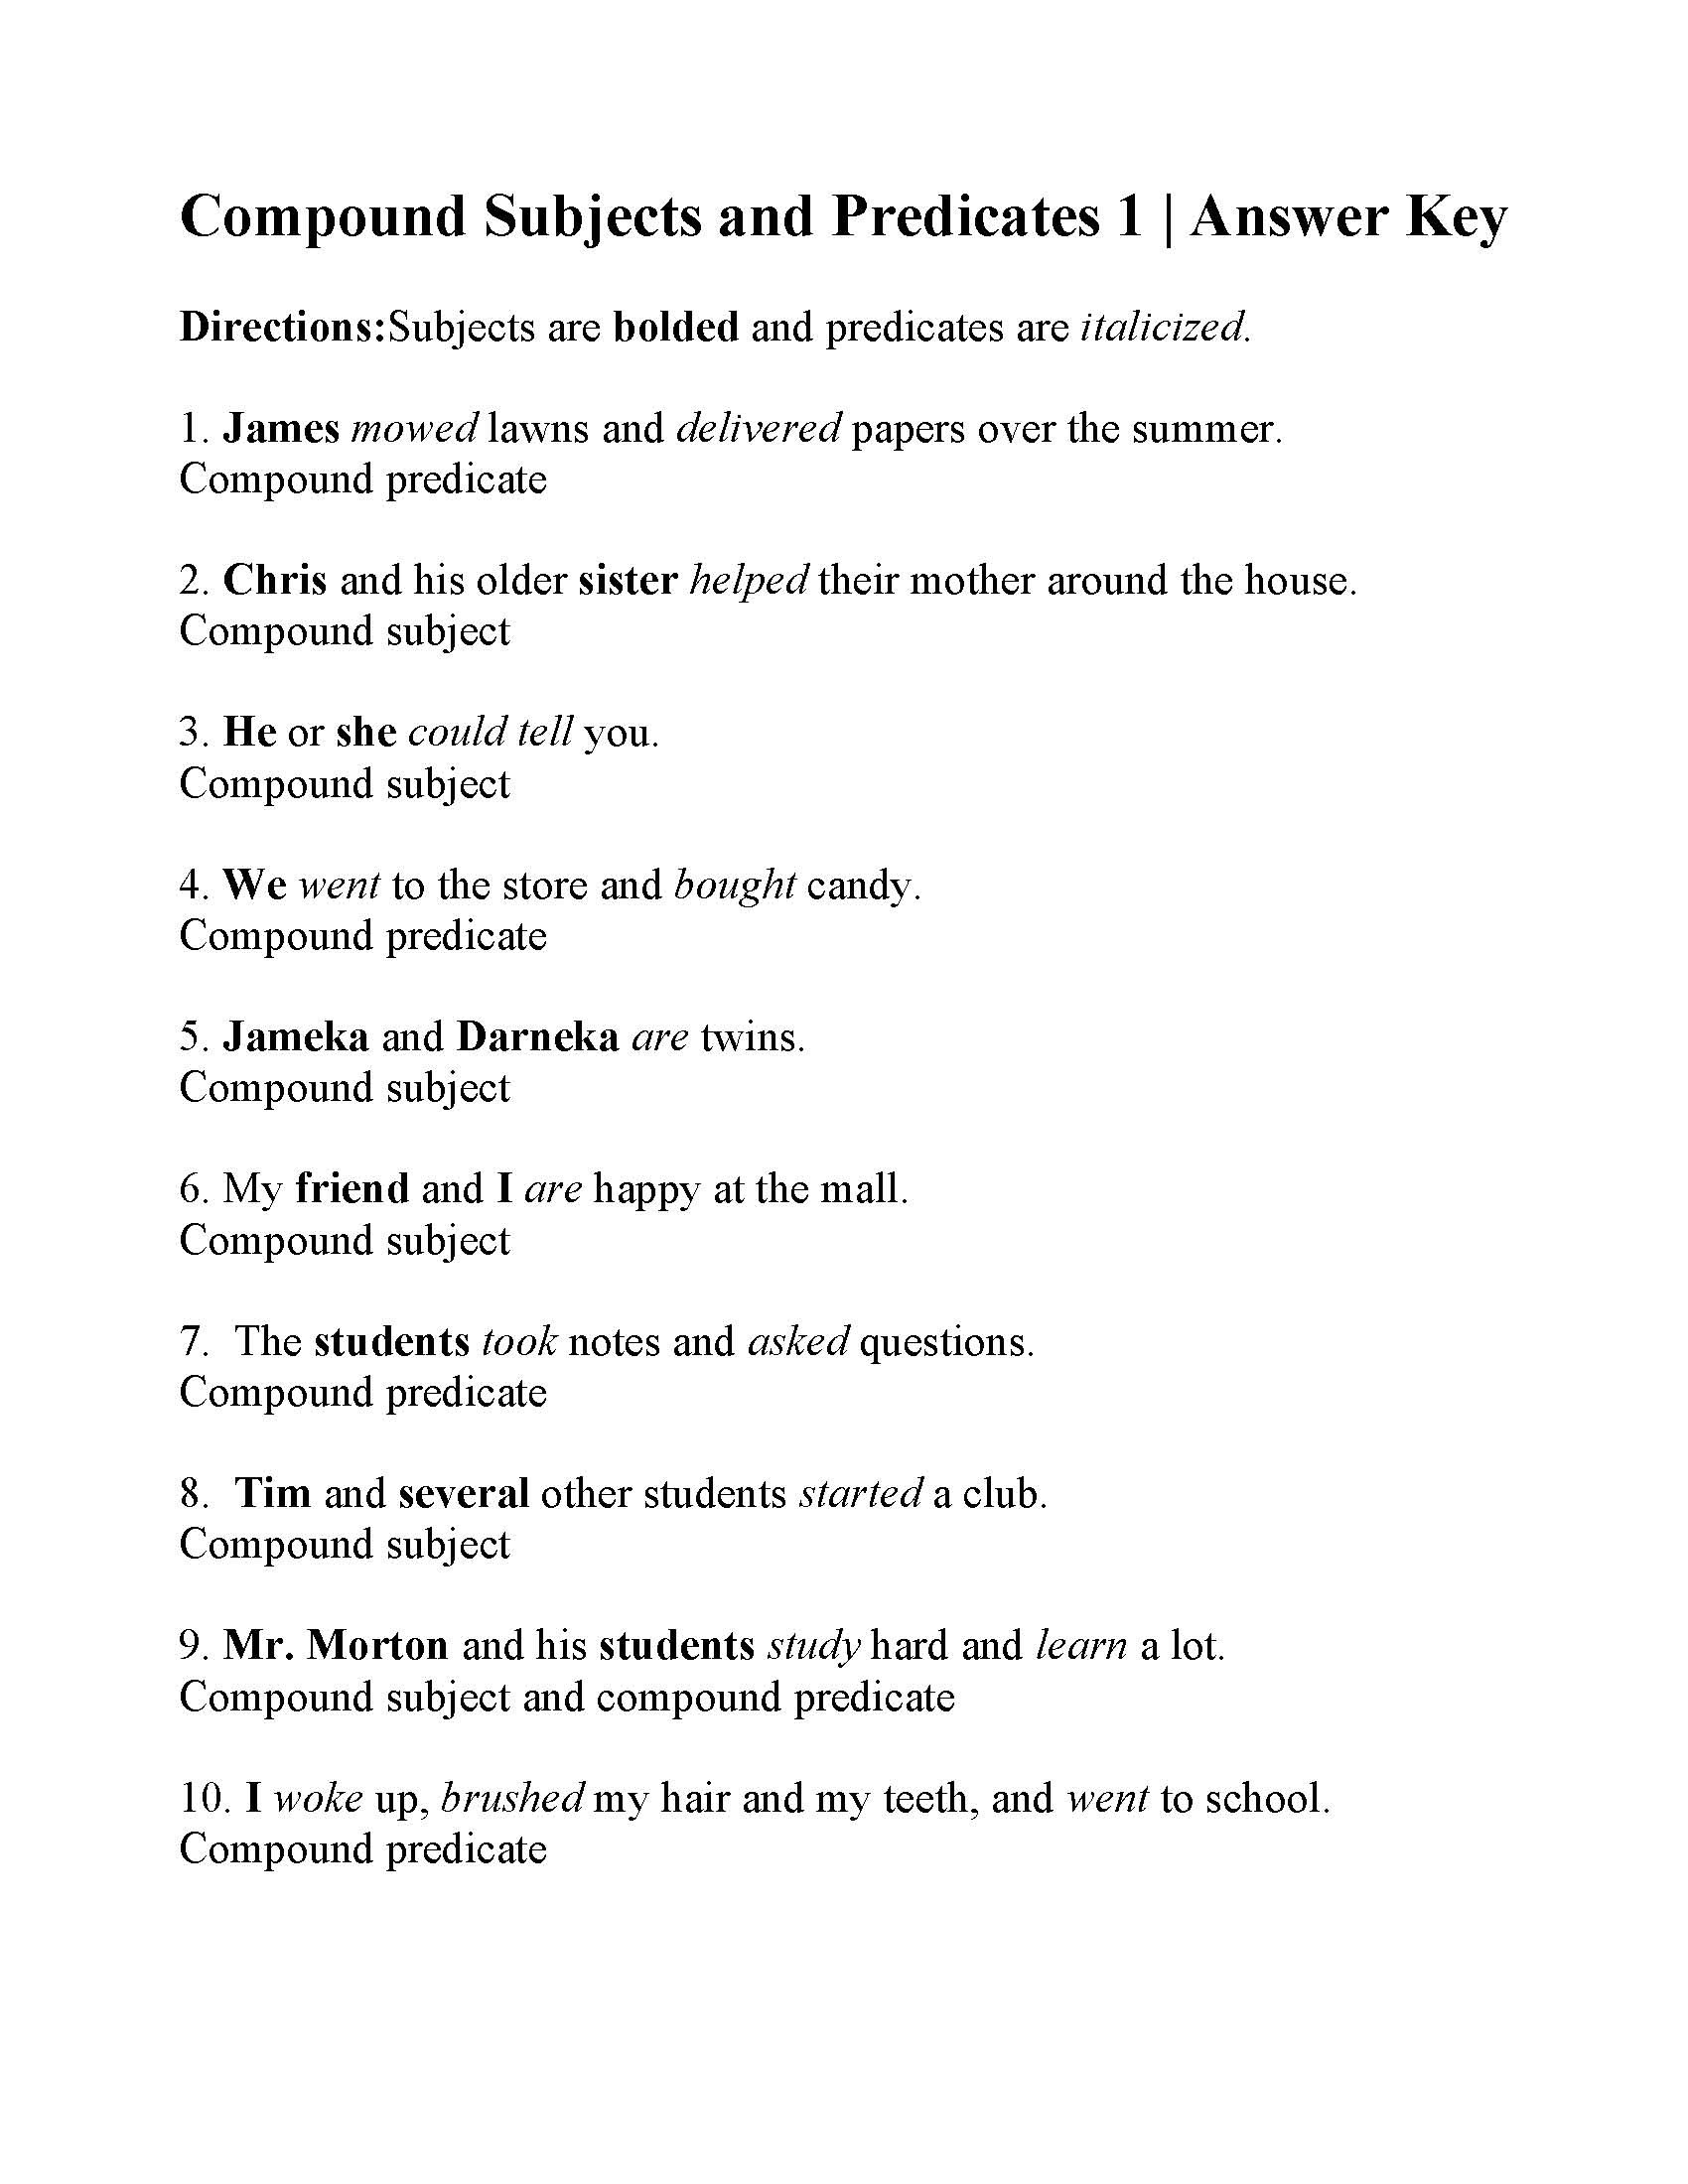 Subjects and Predicates Worksheet Pound Subjects and Predicates Worksheet